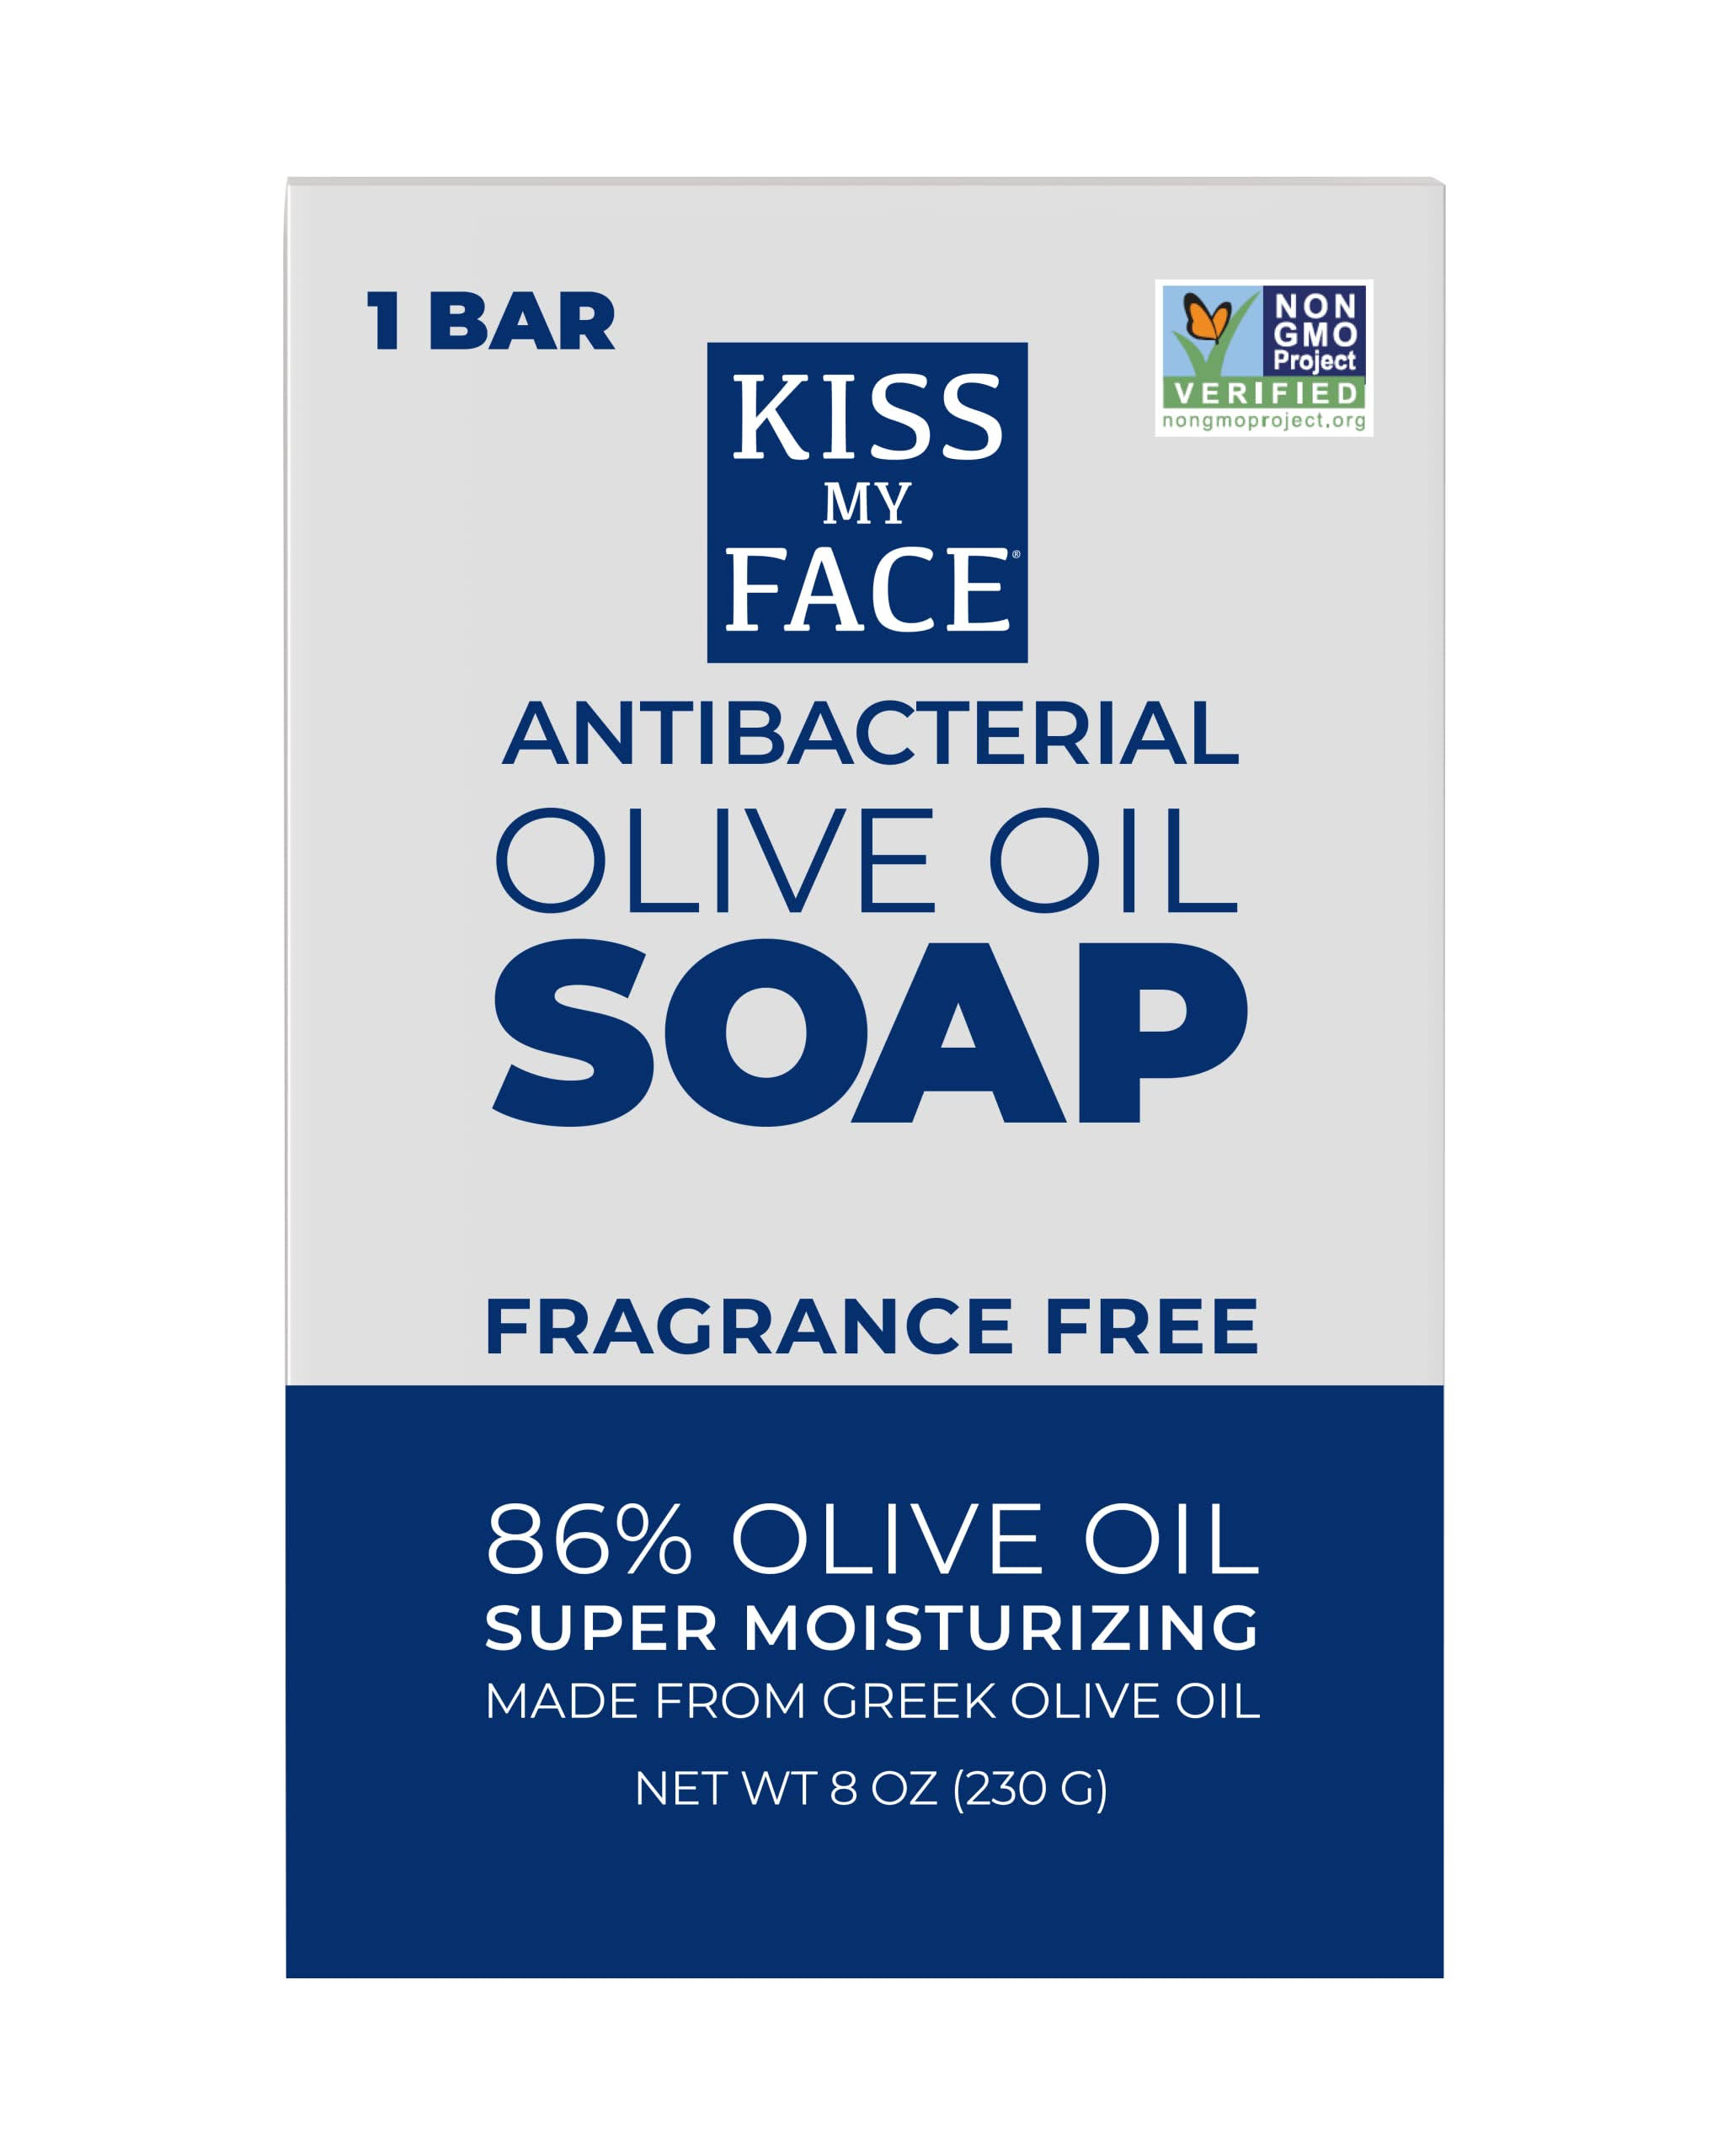 Kiss My Face - Antibacterial Olive Oil Bar Soap, Fragrance Free - 8 oz